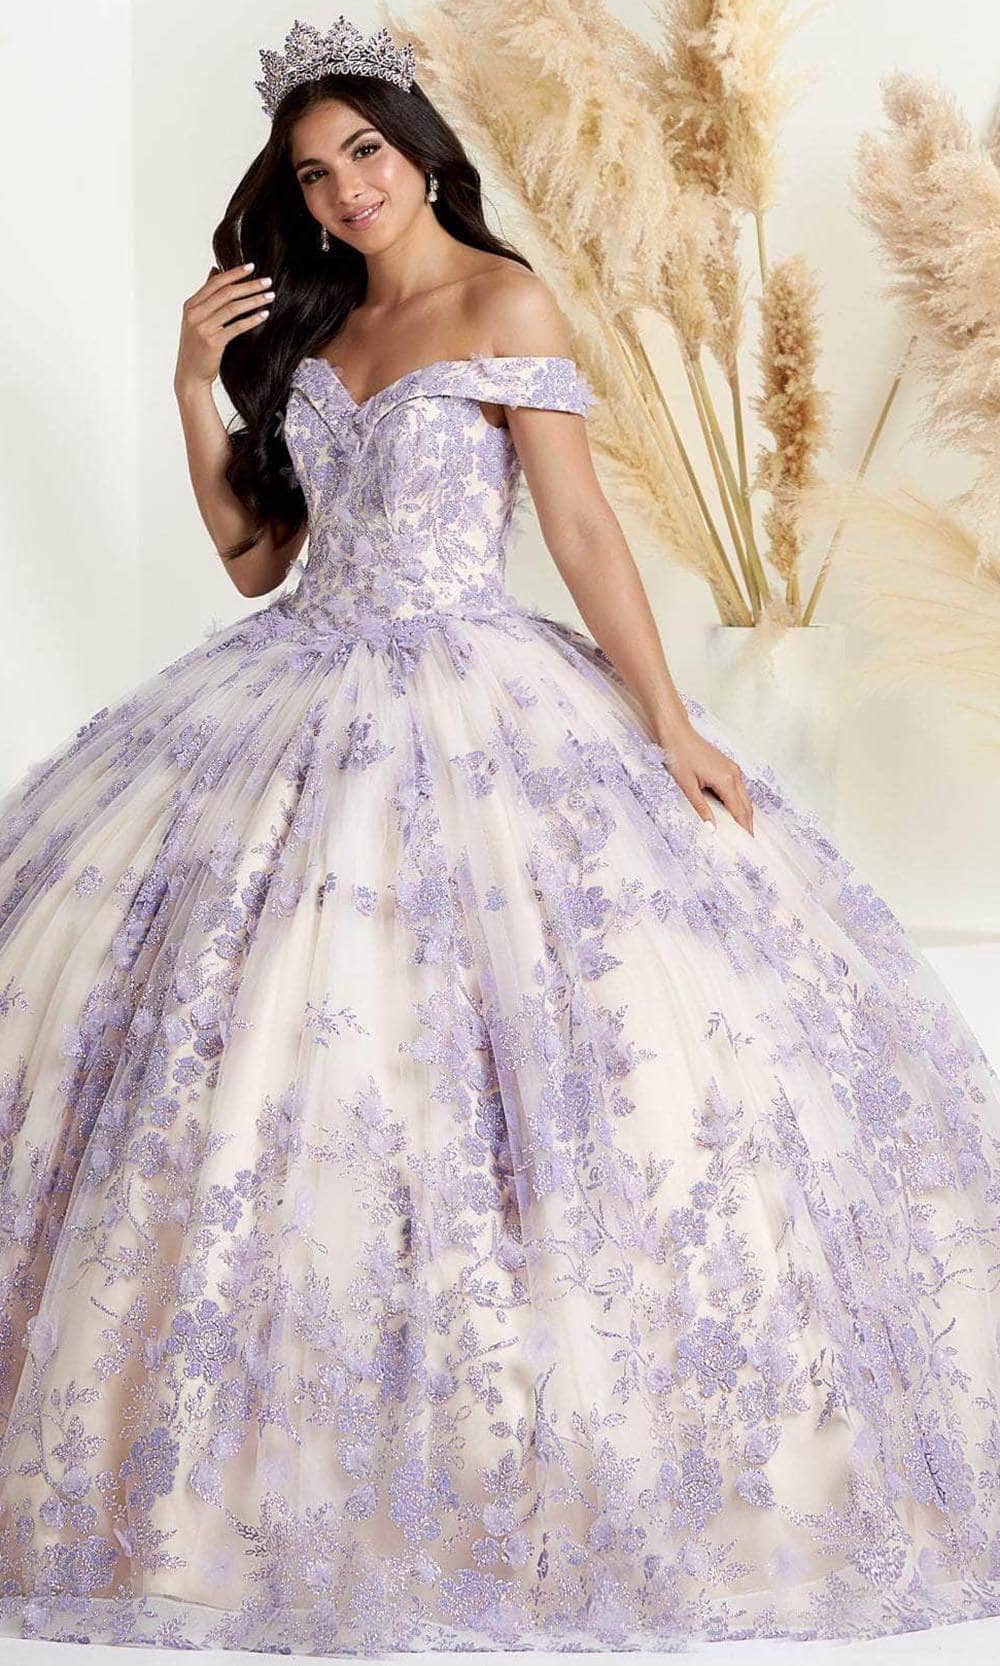 Fiesta Gowns 56445 - Florals And Appliques Ballgown Ballgown 0 / Lilac/Champagne